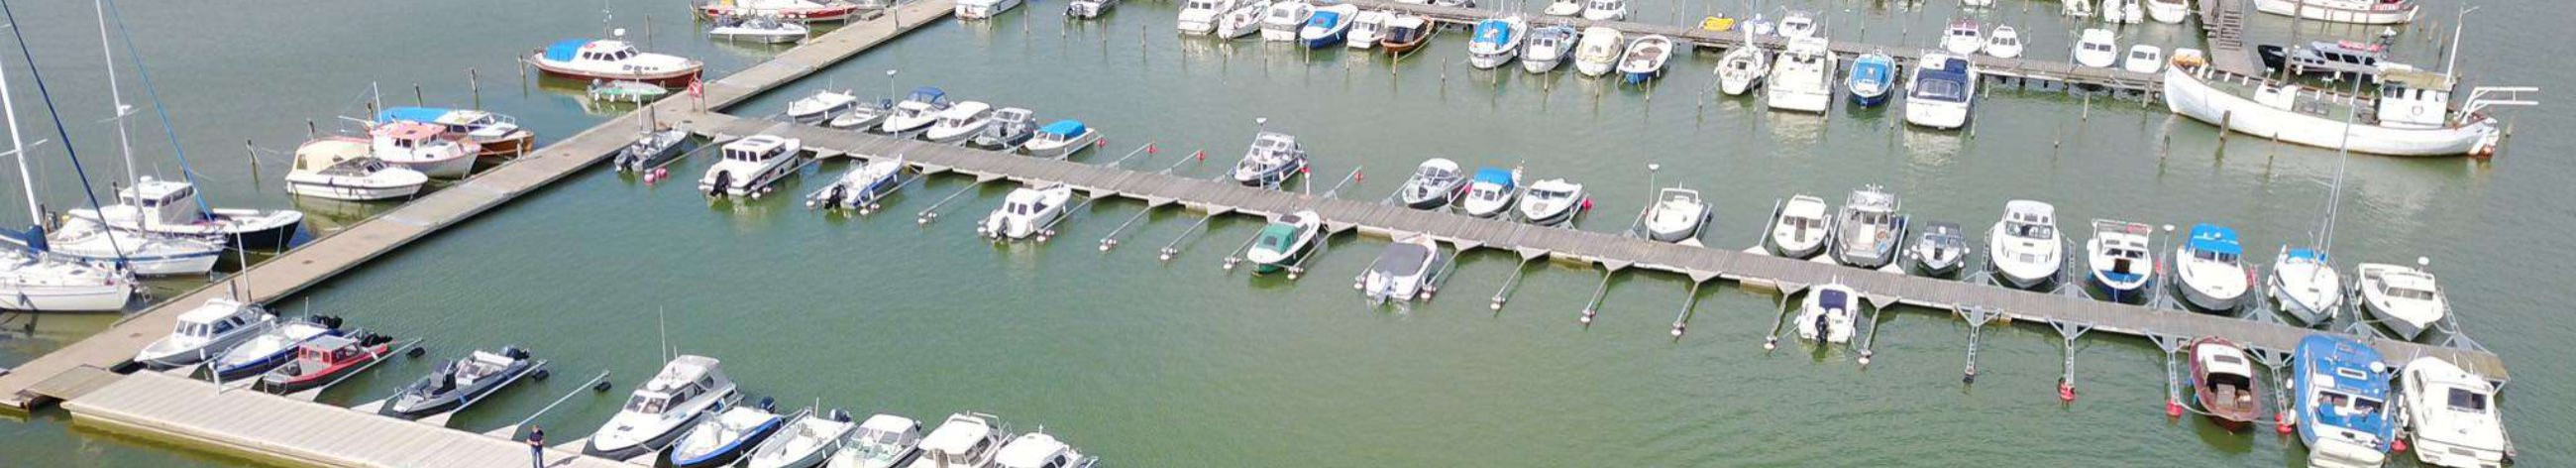 full solutions, Service, monolithic berth, boat piers, port berths, swimming berths, swimming berth eco, top marine dealer, installation of floating berths, offering solutions